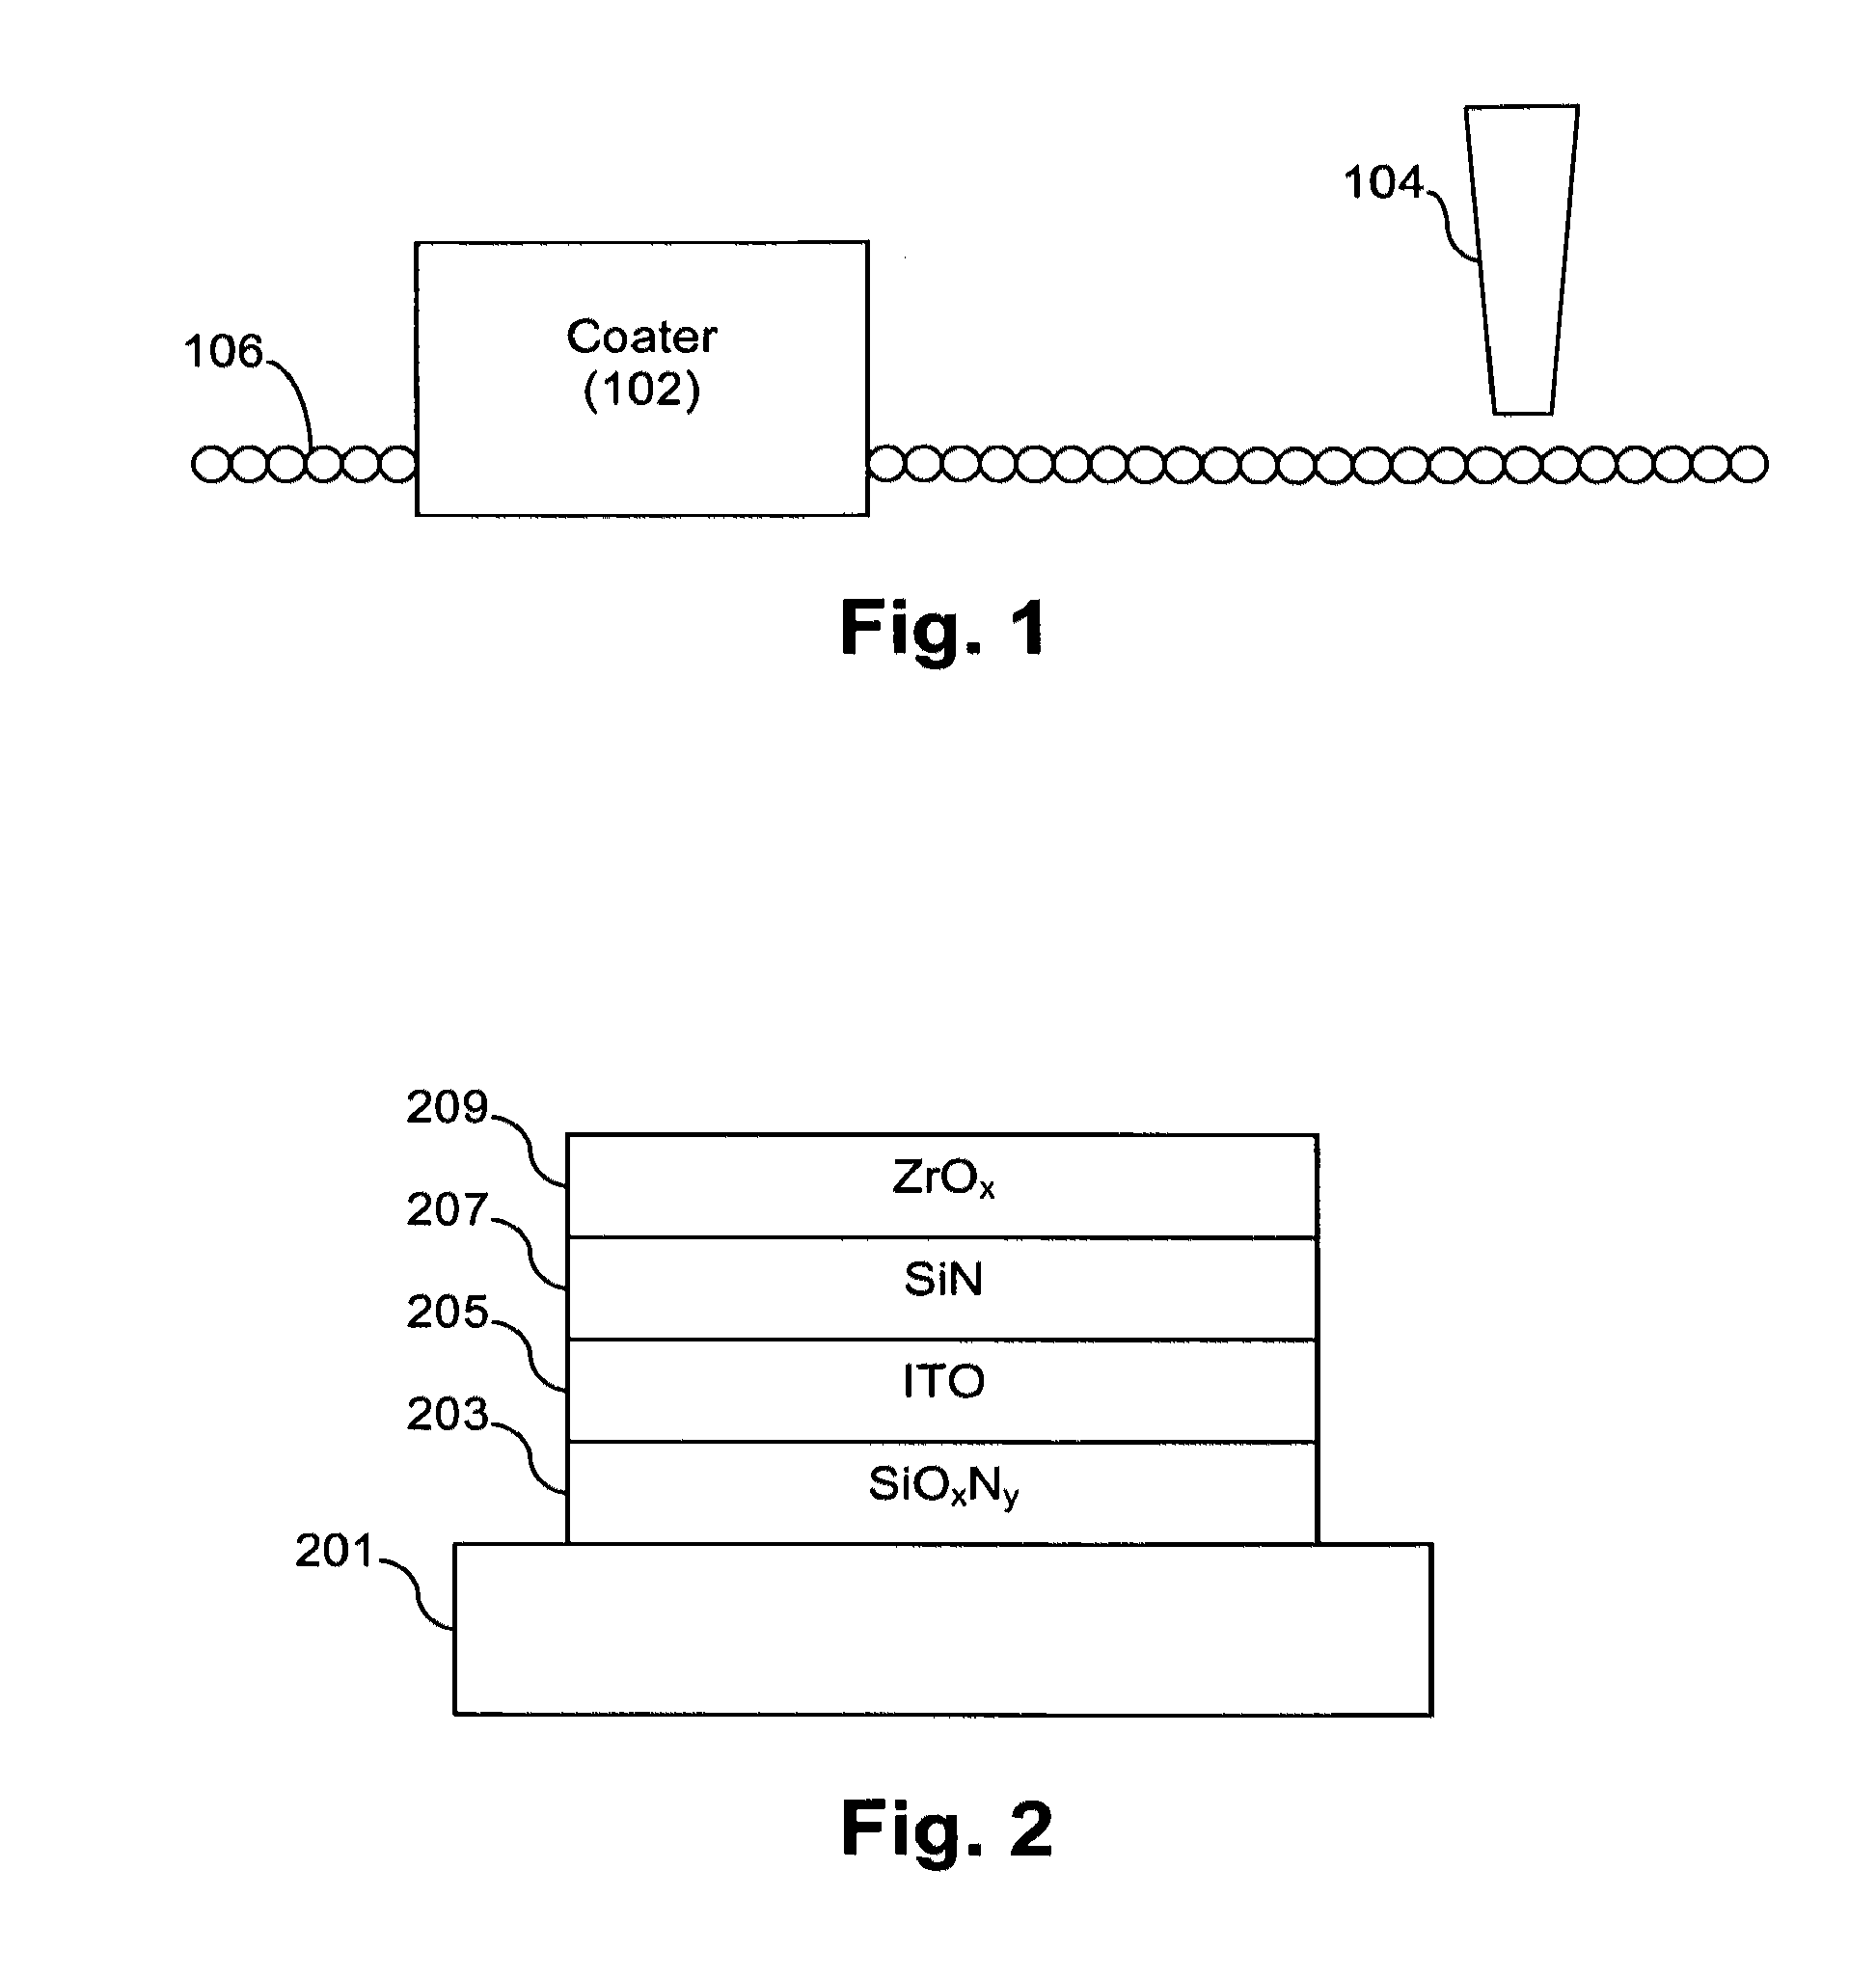 System and/or method for heat treating conductive coatings using wavelength-tuned infrared radiation